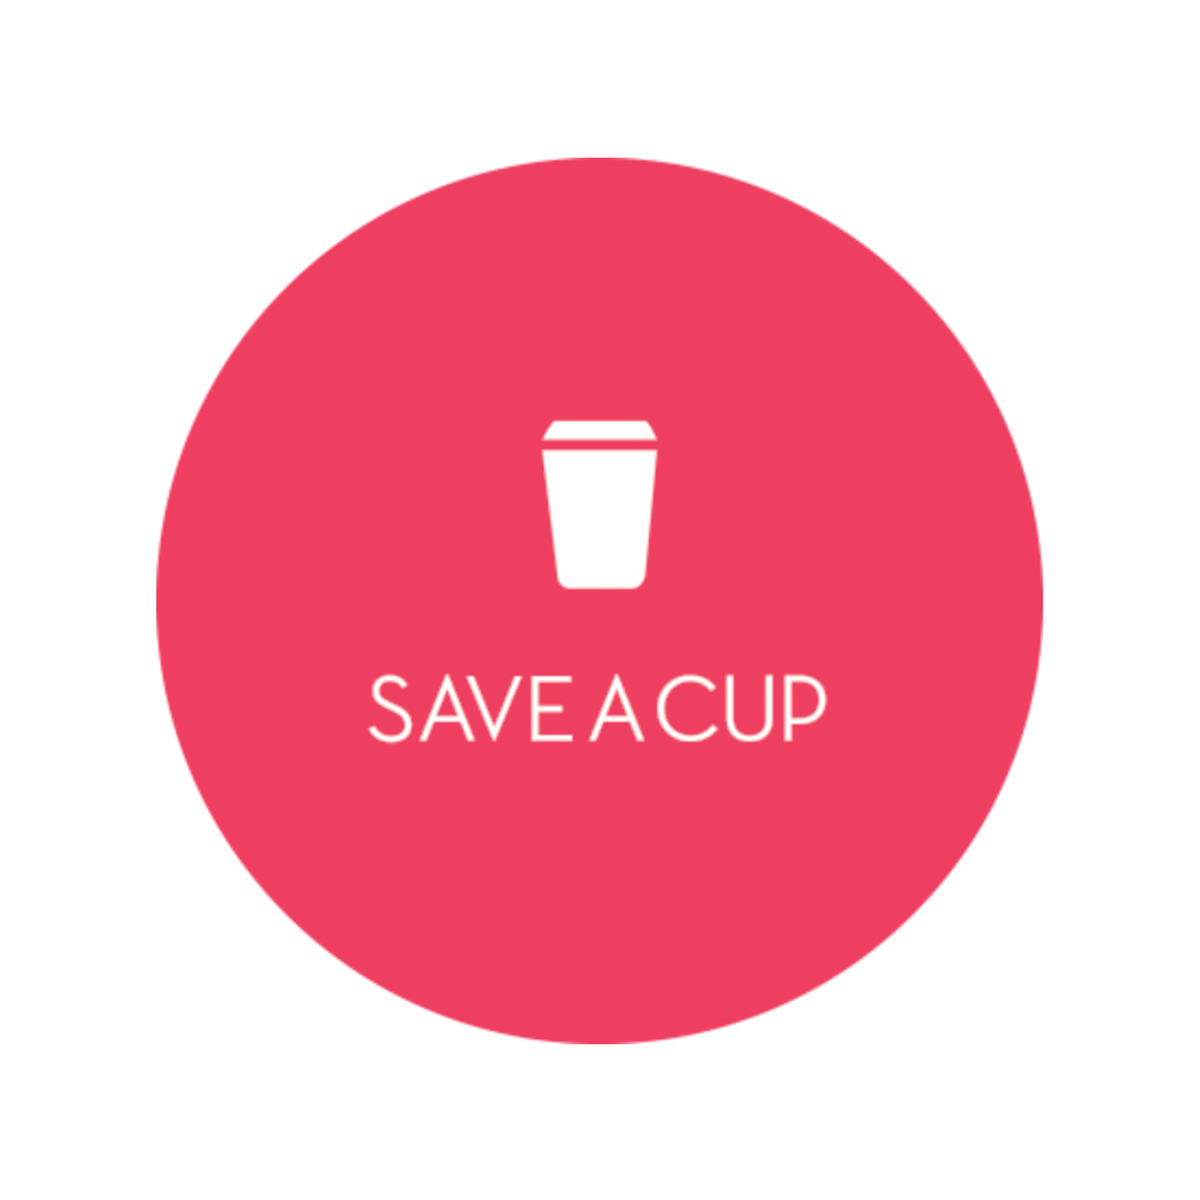 Save A Cup Help Center home page